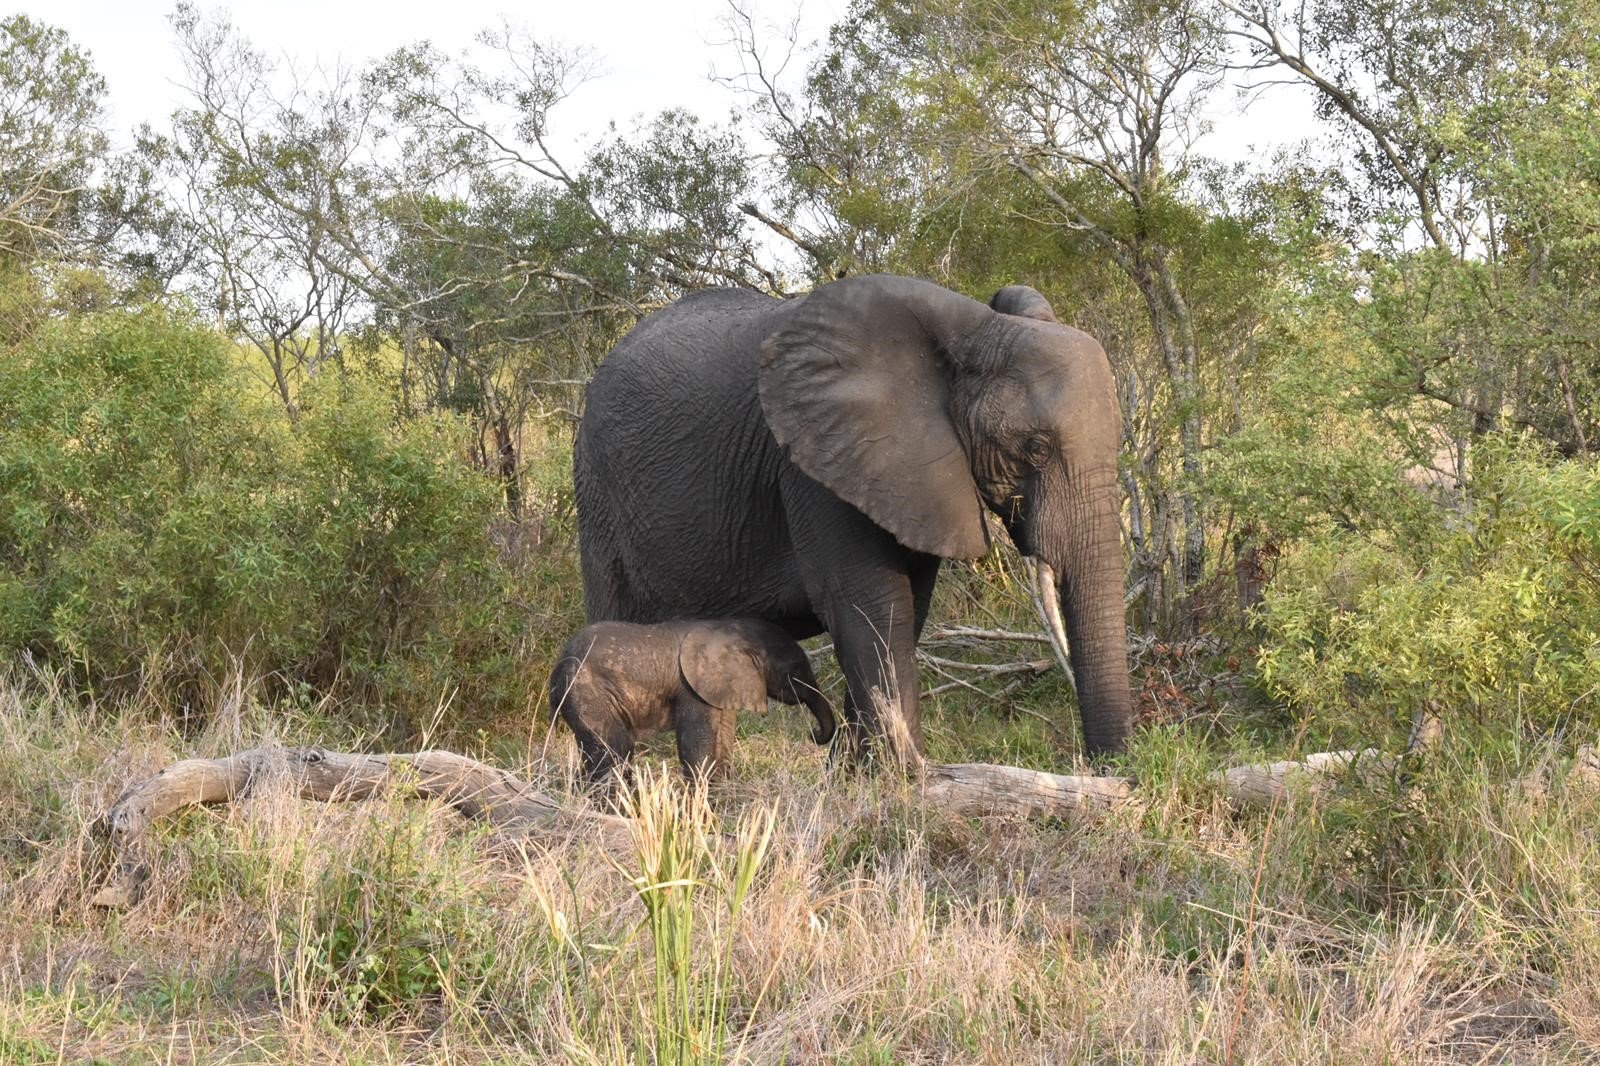 Photo of an elephant and her child in a the wild in South Africa.